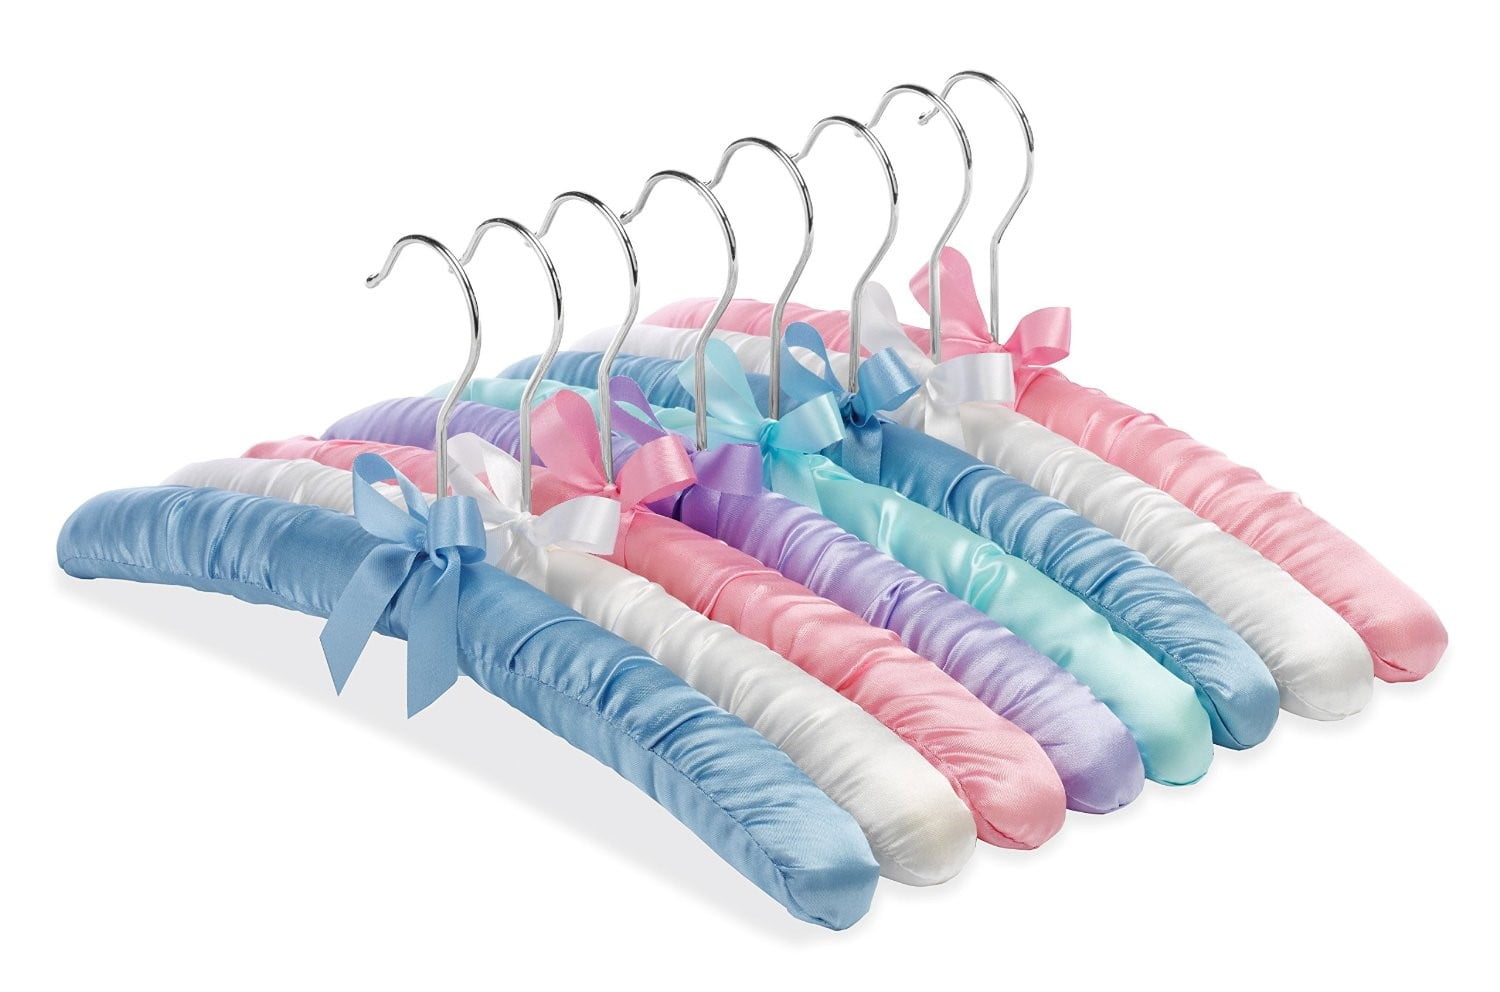 Lot of 23 White Silver Toned Wire Hangers Clothing Standard Adult Size  Pants Bar